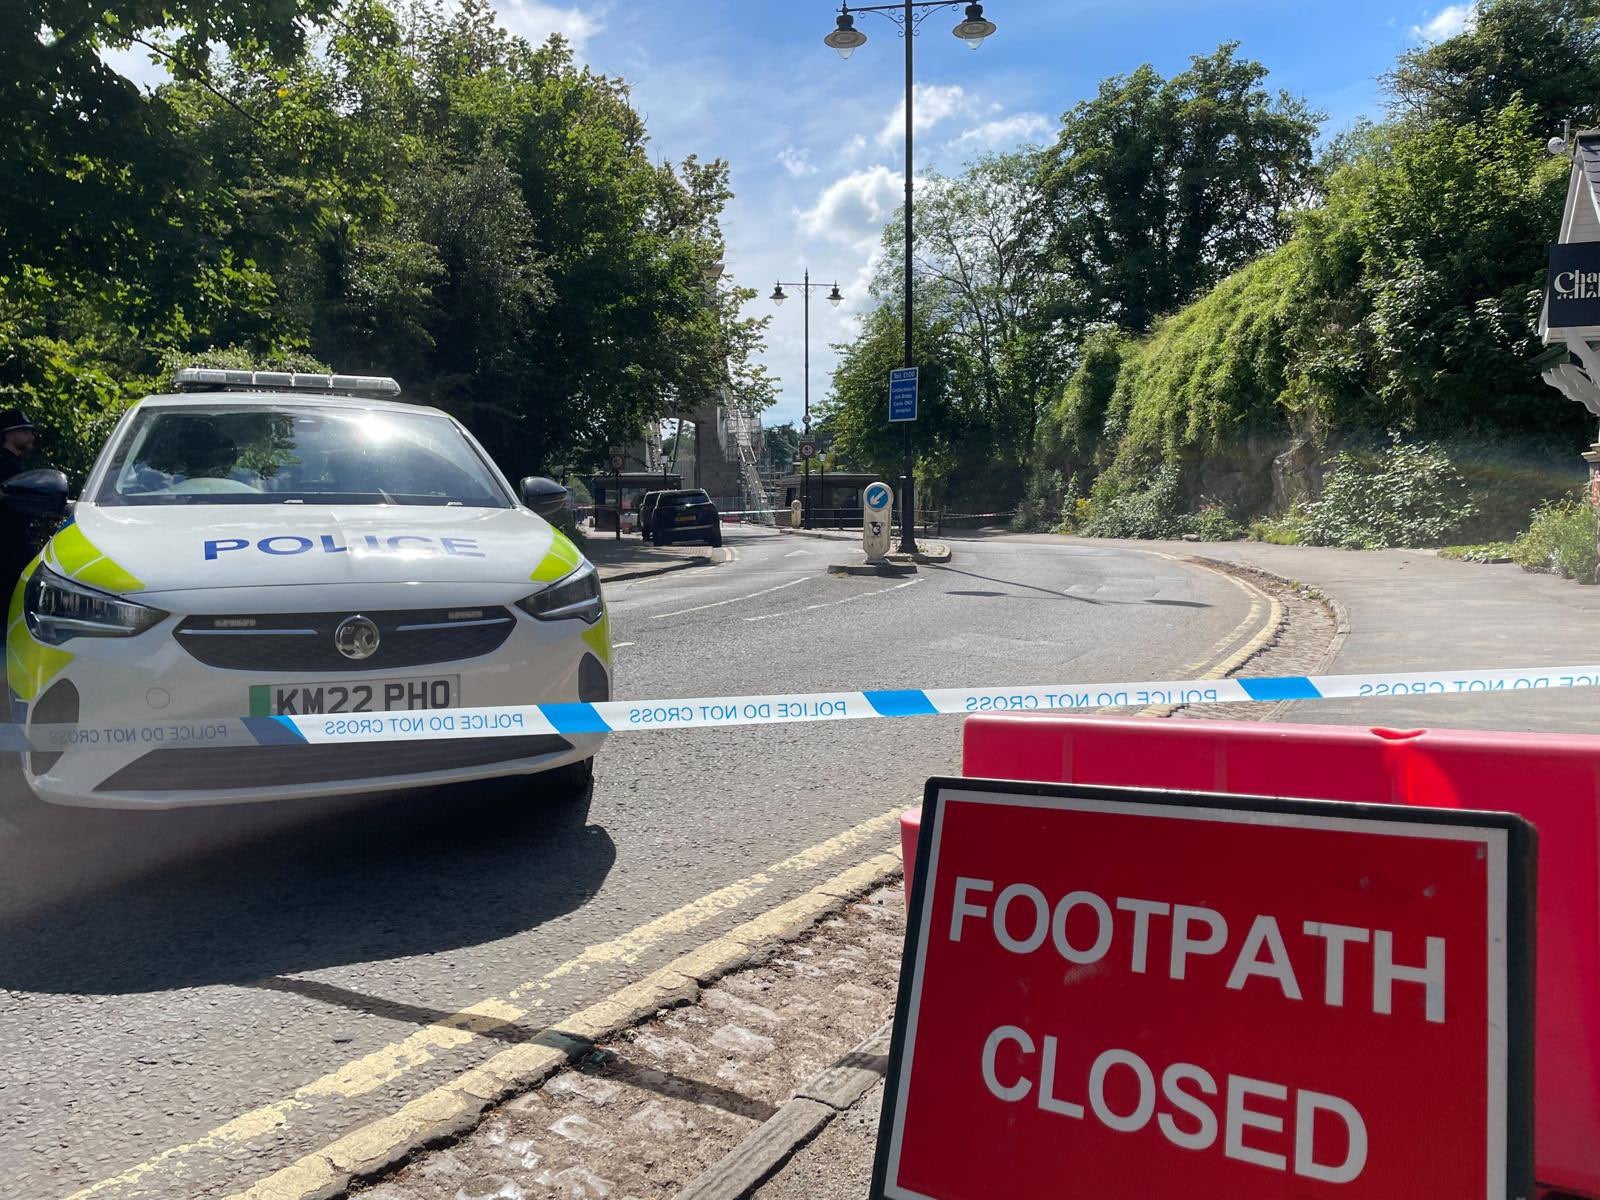 Clifton Suspension Bridge remained cordoned off on Thursday as police searched for a man over the discovery of human remains